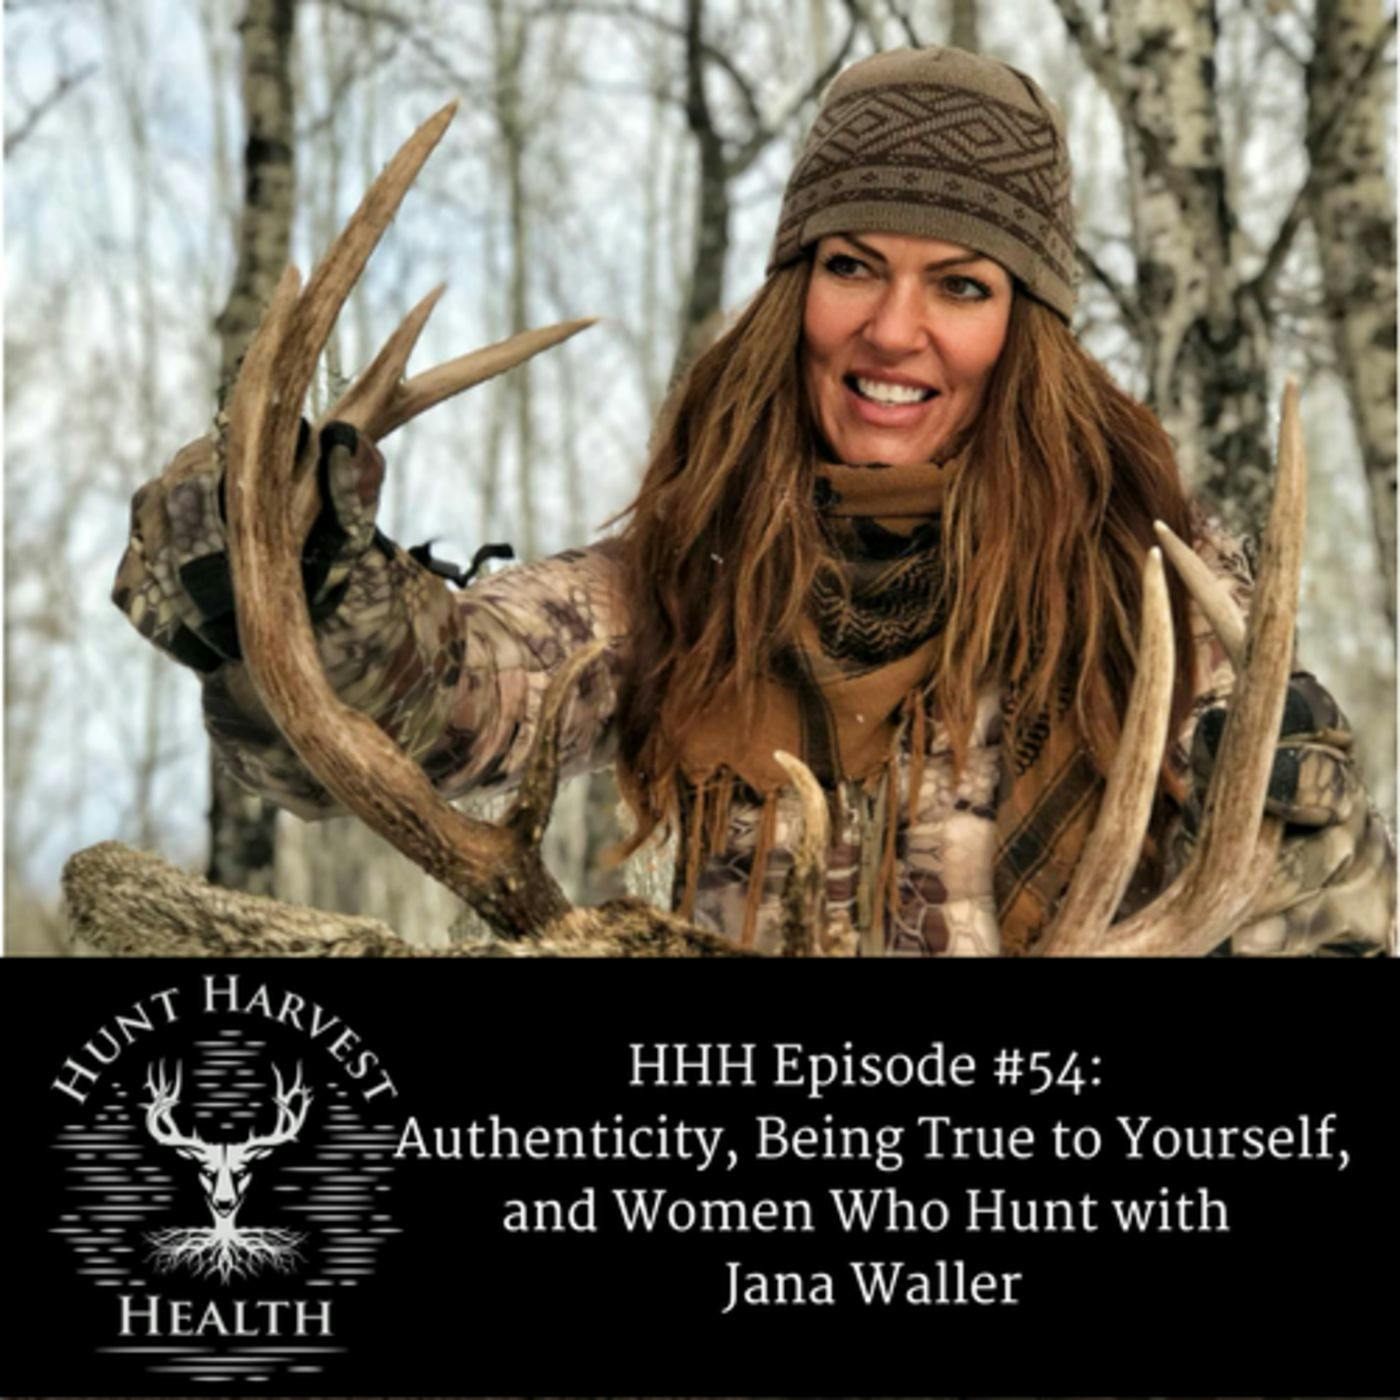 Episode #54: Authenticity, Being True to Yourself, and Women Who Hunt with Jana Waller